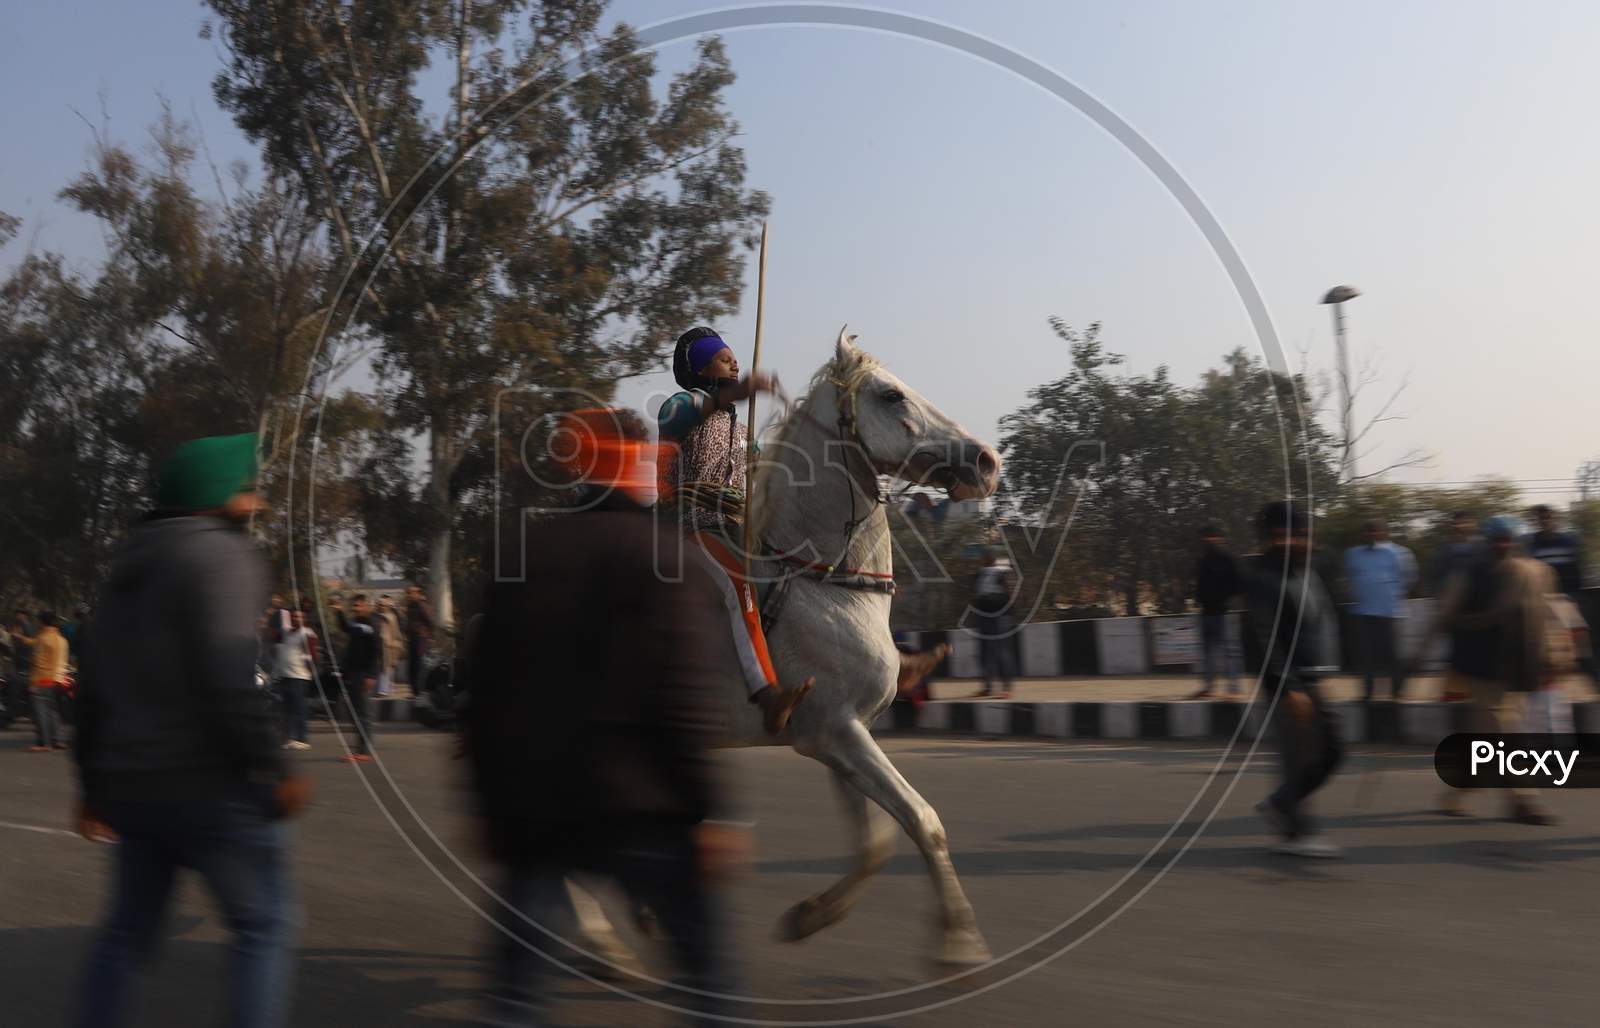 Farmers rally against agriculture reforms turned violent, after protesting farmers storm Delhi's historic Red Fort complex on January 26, 2021.